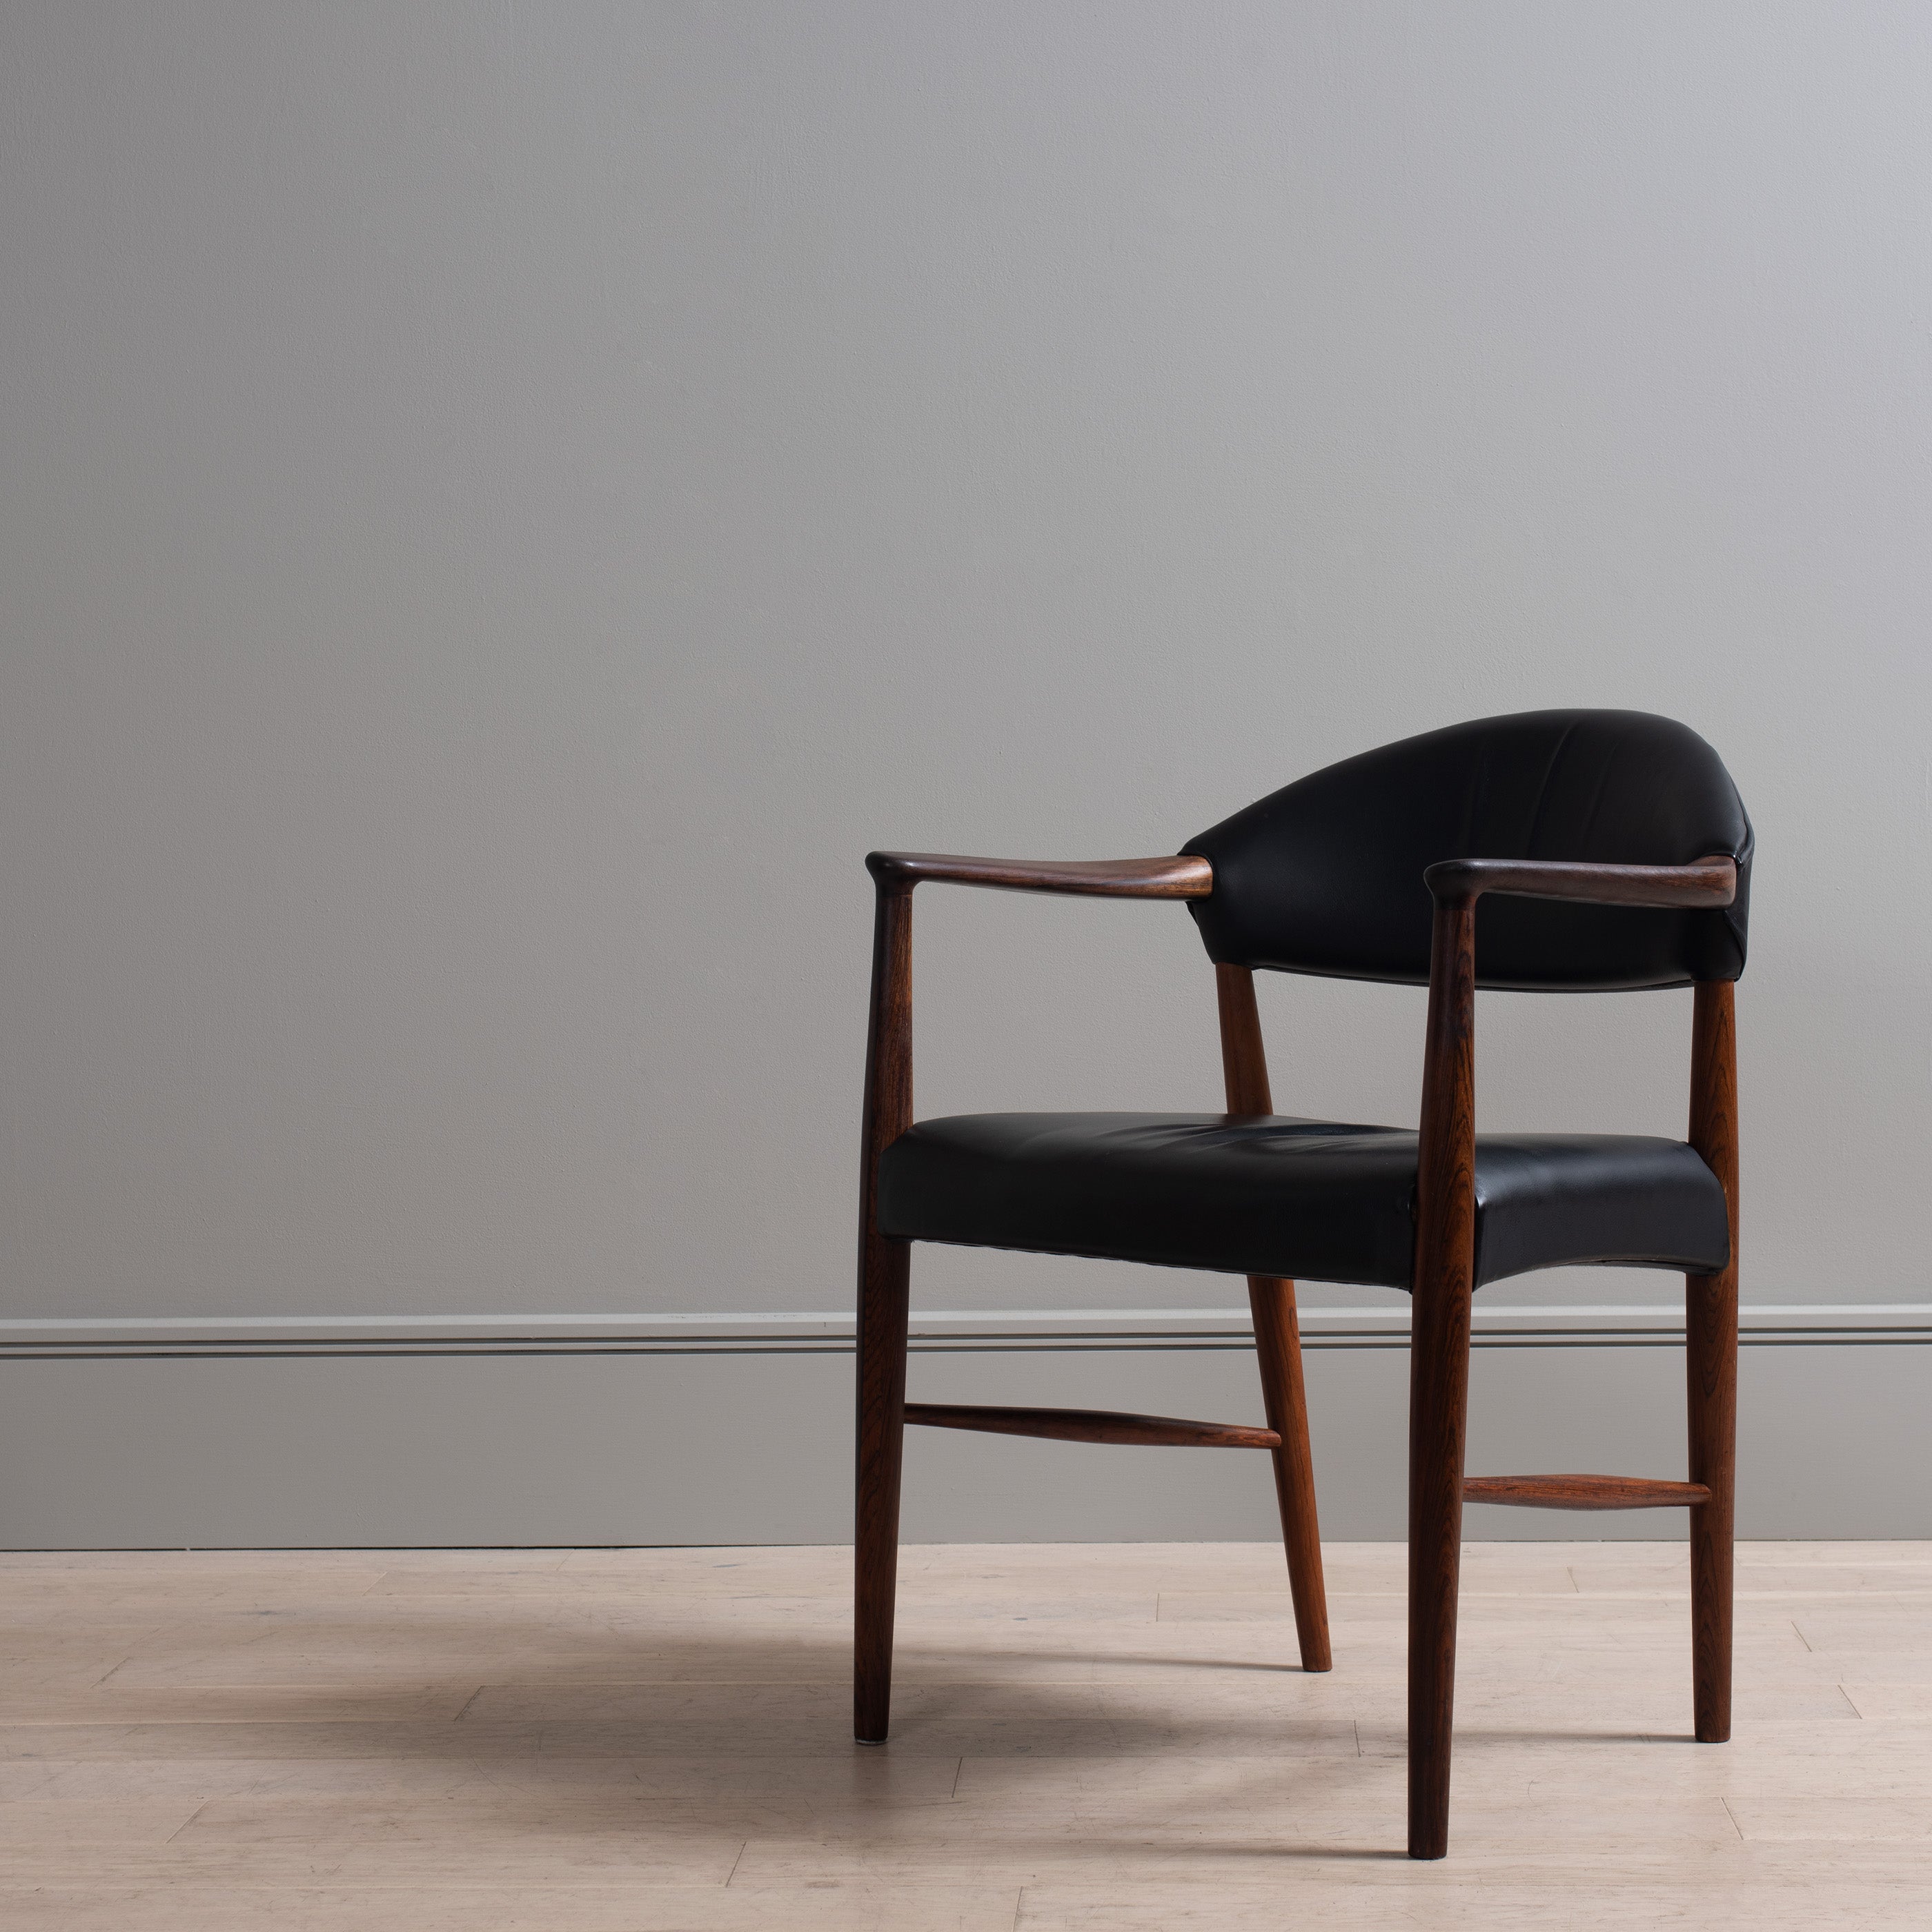 Classic Scandinavian mid-century elbow/desk or occasional chair by Kurt Olsen. Designed by Olsen for for Slagelse Møbelfabrik, Denmark. Smooth sculptural wooden frame that has its original leather upholstery. Produced in Denmark, circa 1950. Very